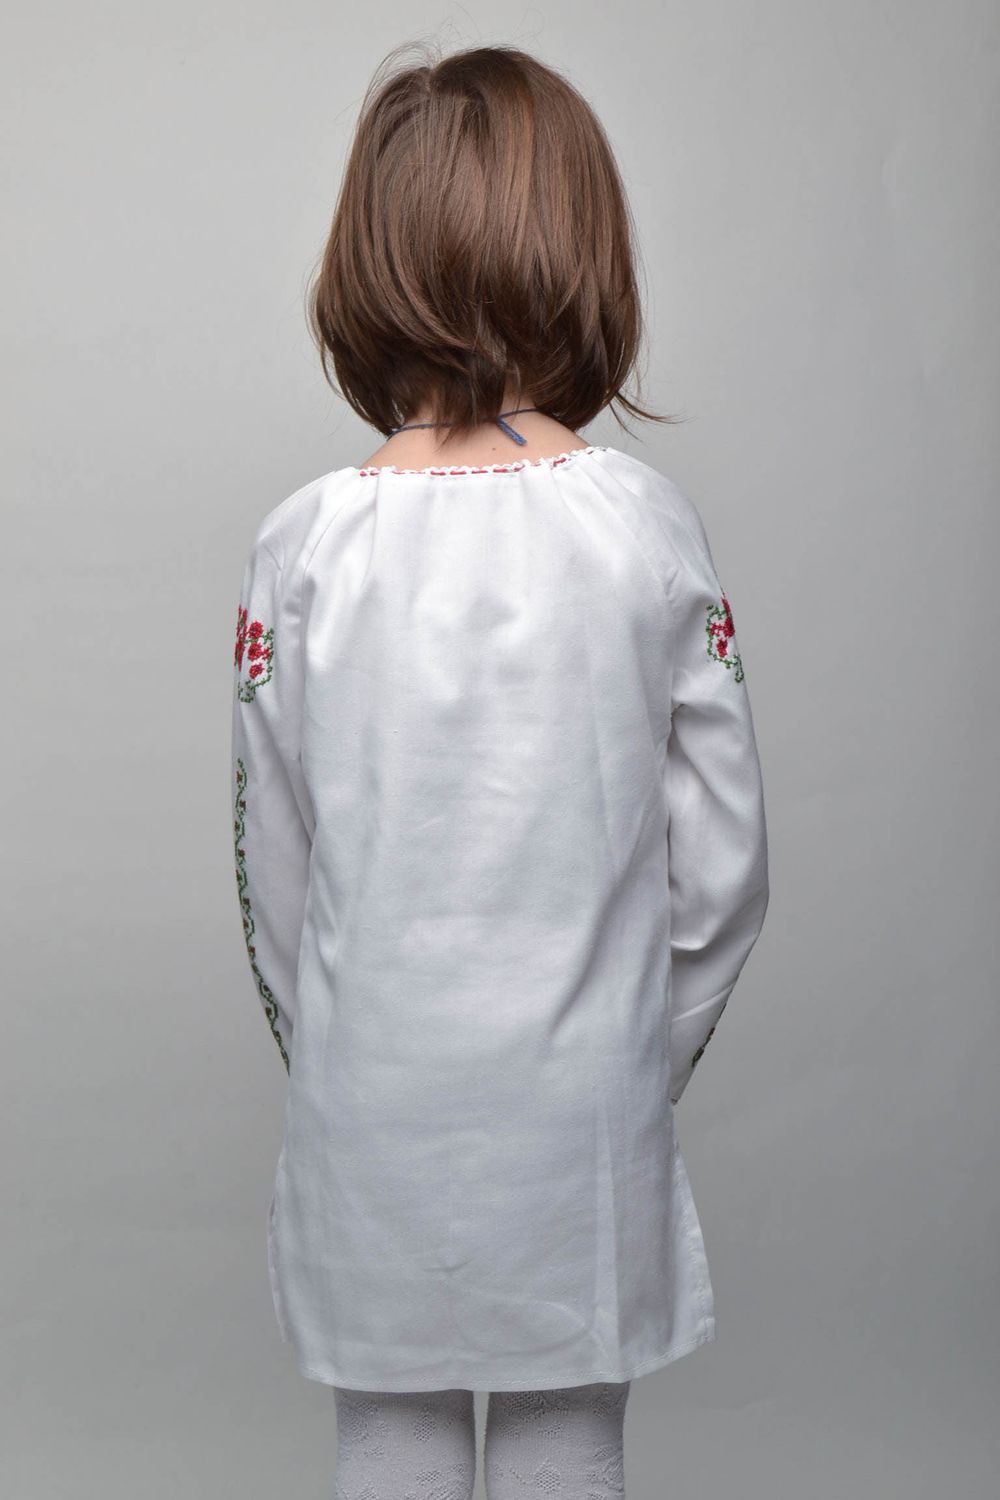 Embroidered blouse with long sleeves for girl photo 4